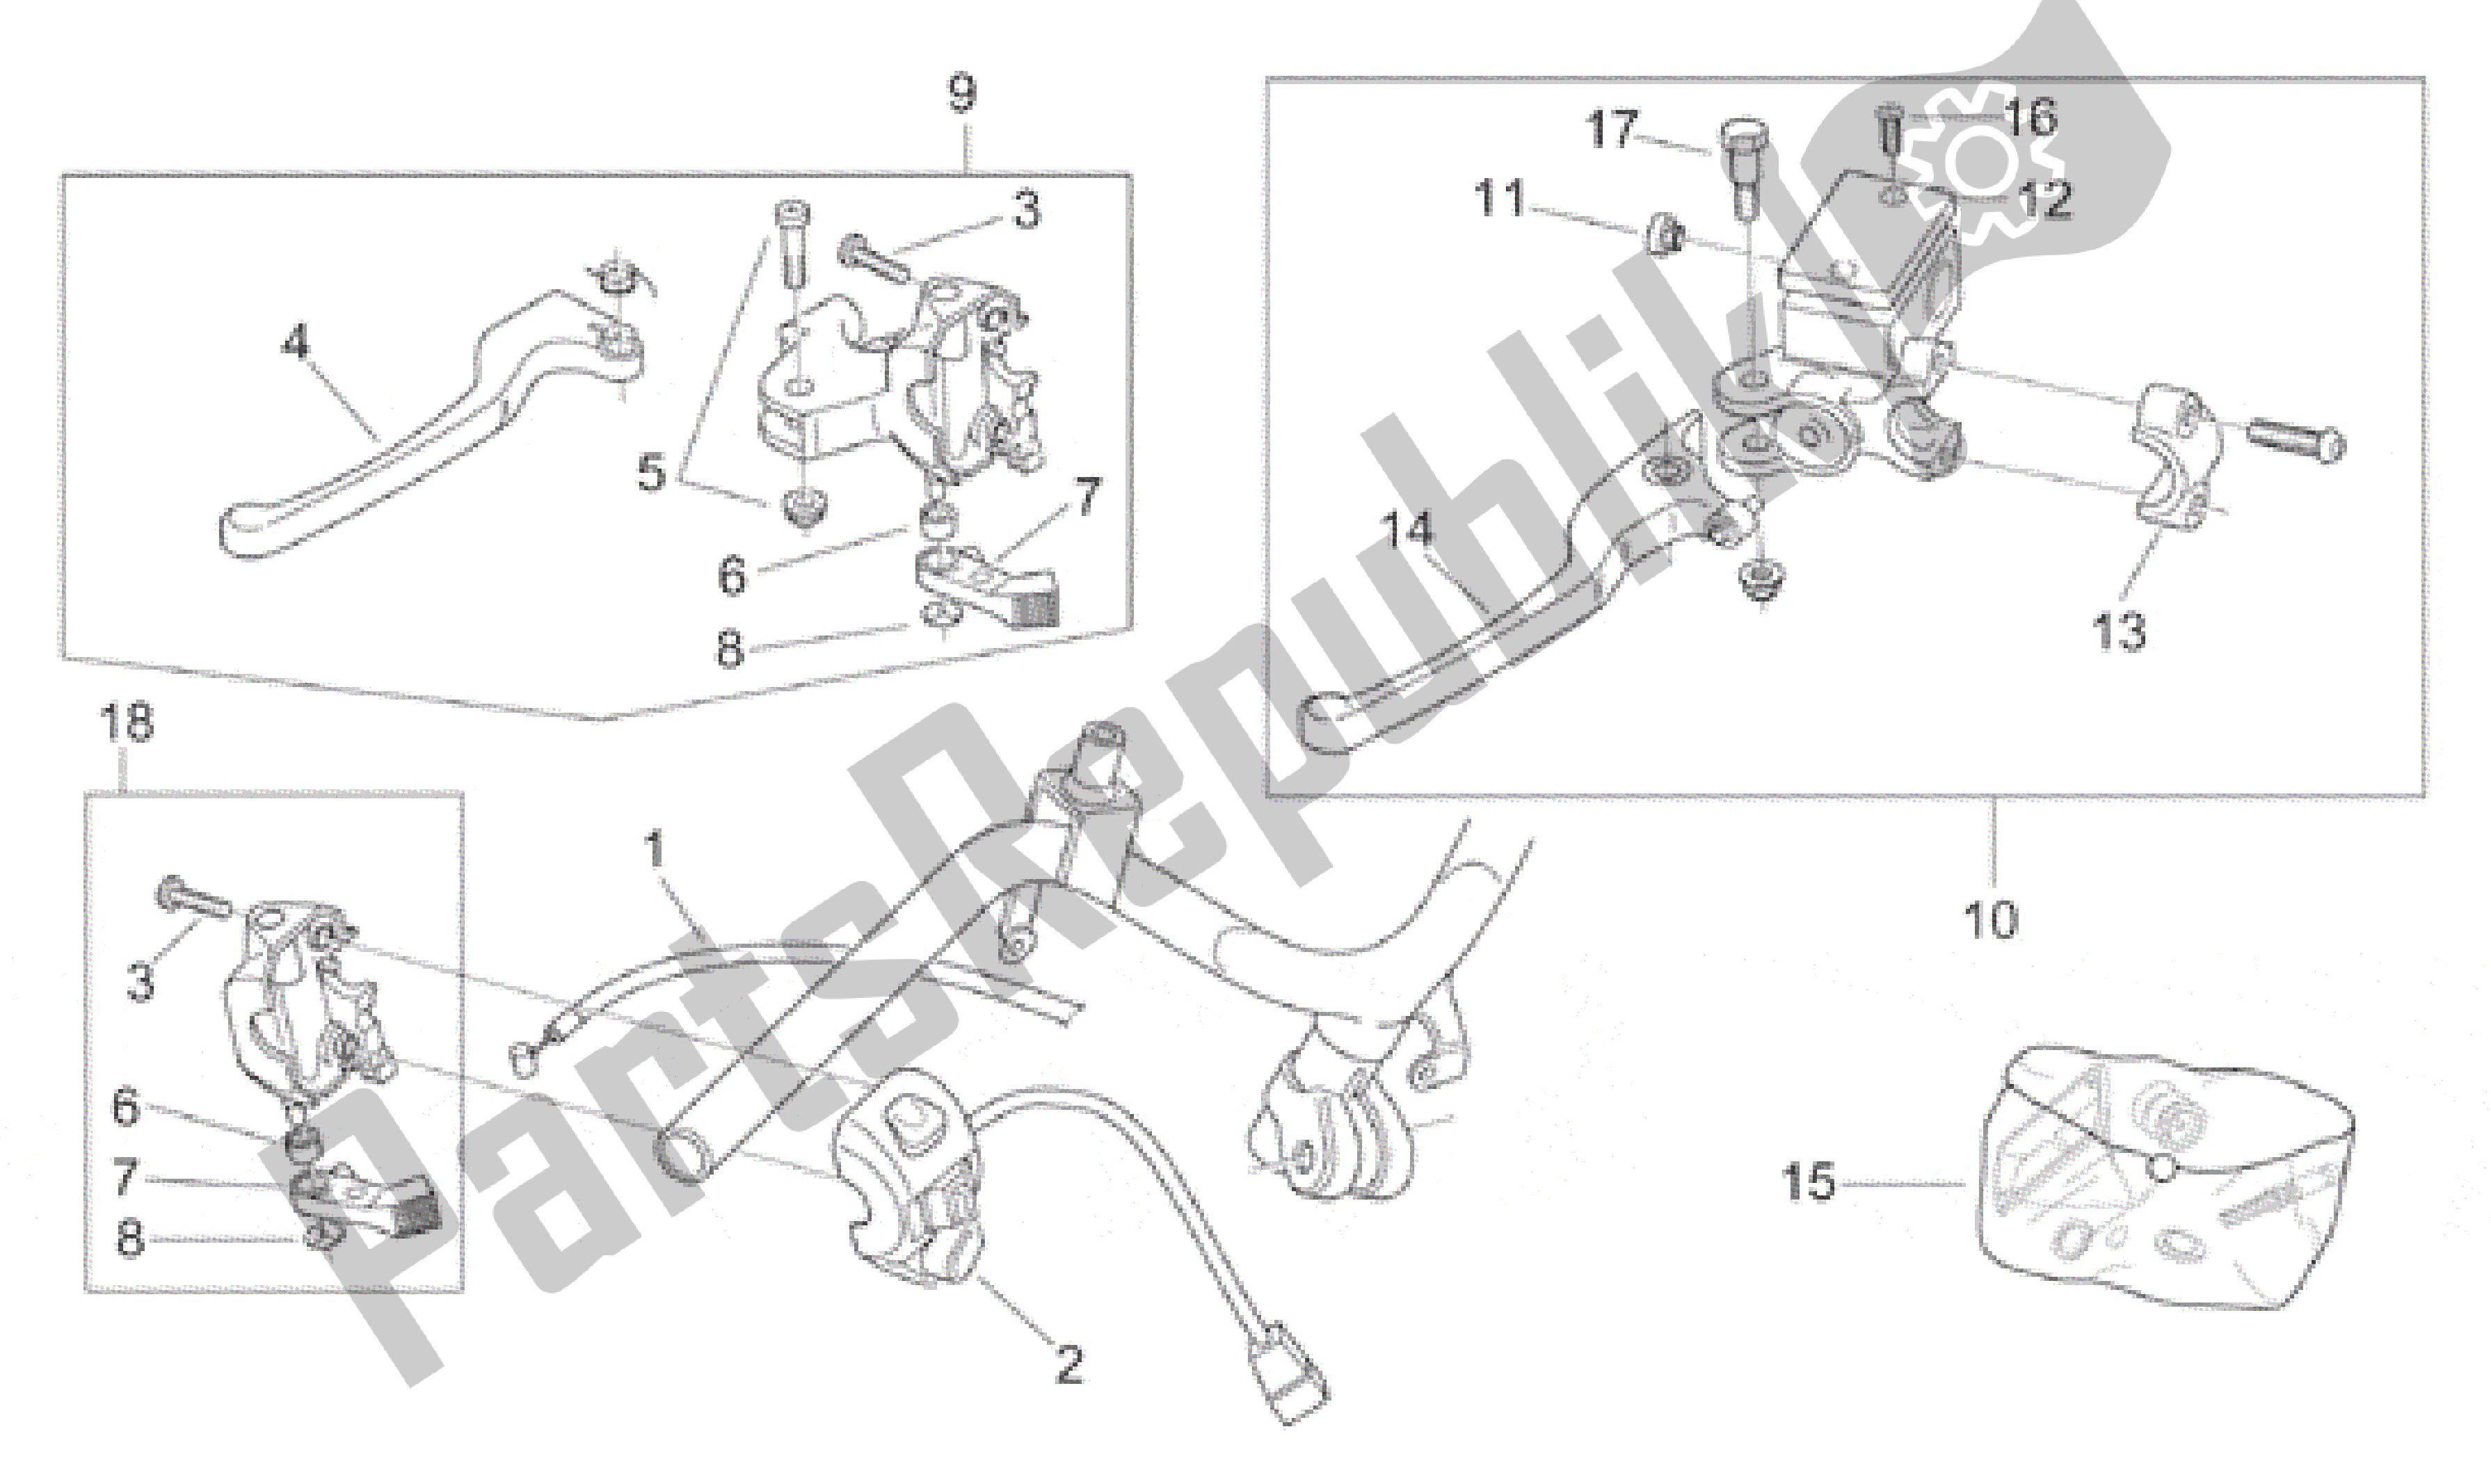 All parts for the Lh Controls of the Aprilia Scarabeo 50 1999